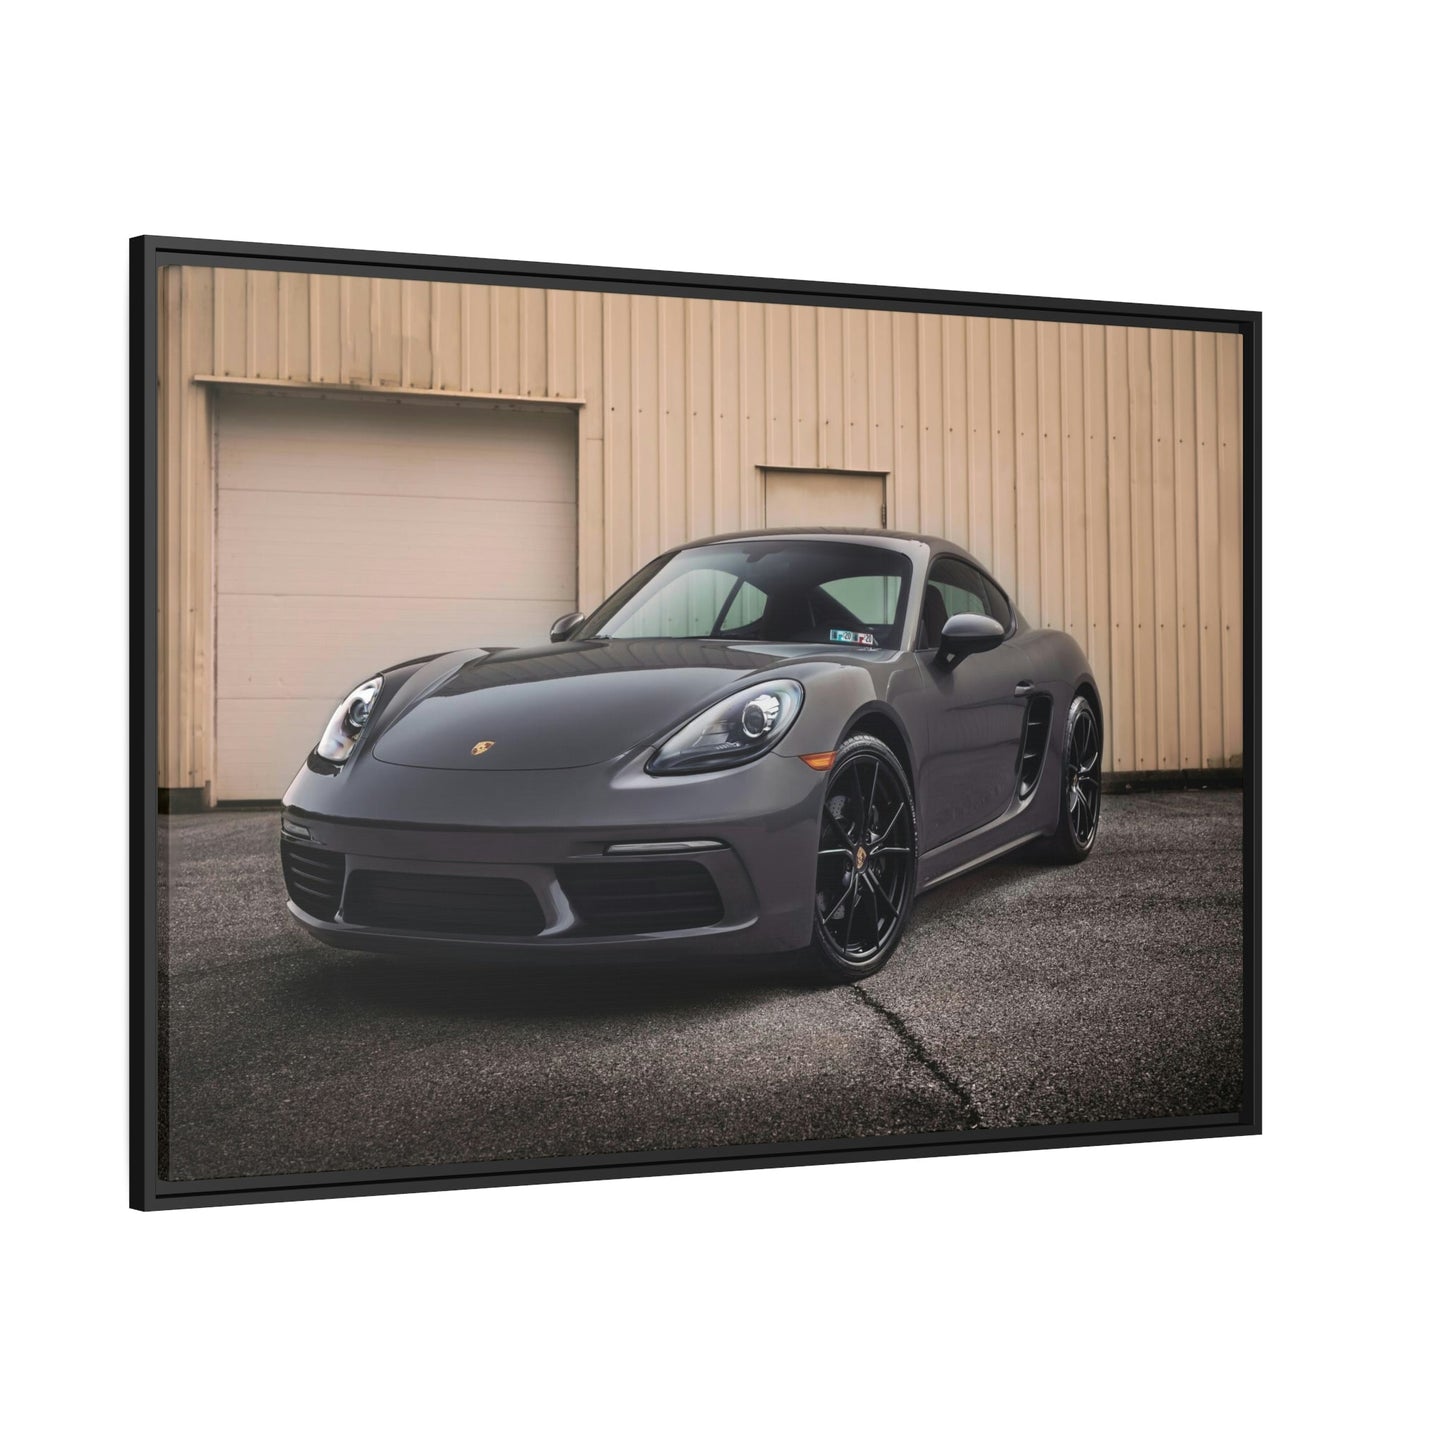 The Thrill of Porsche: Breathtaking Wall Art and Print on Canvas of Sports Cars